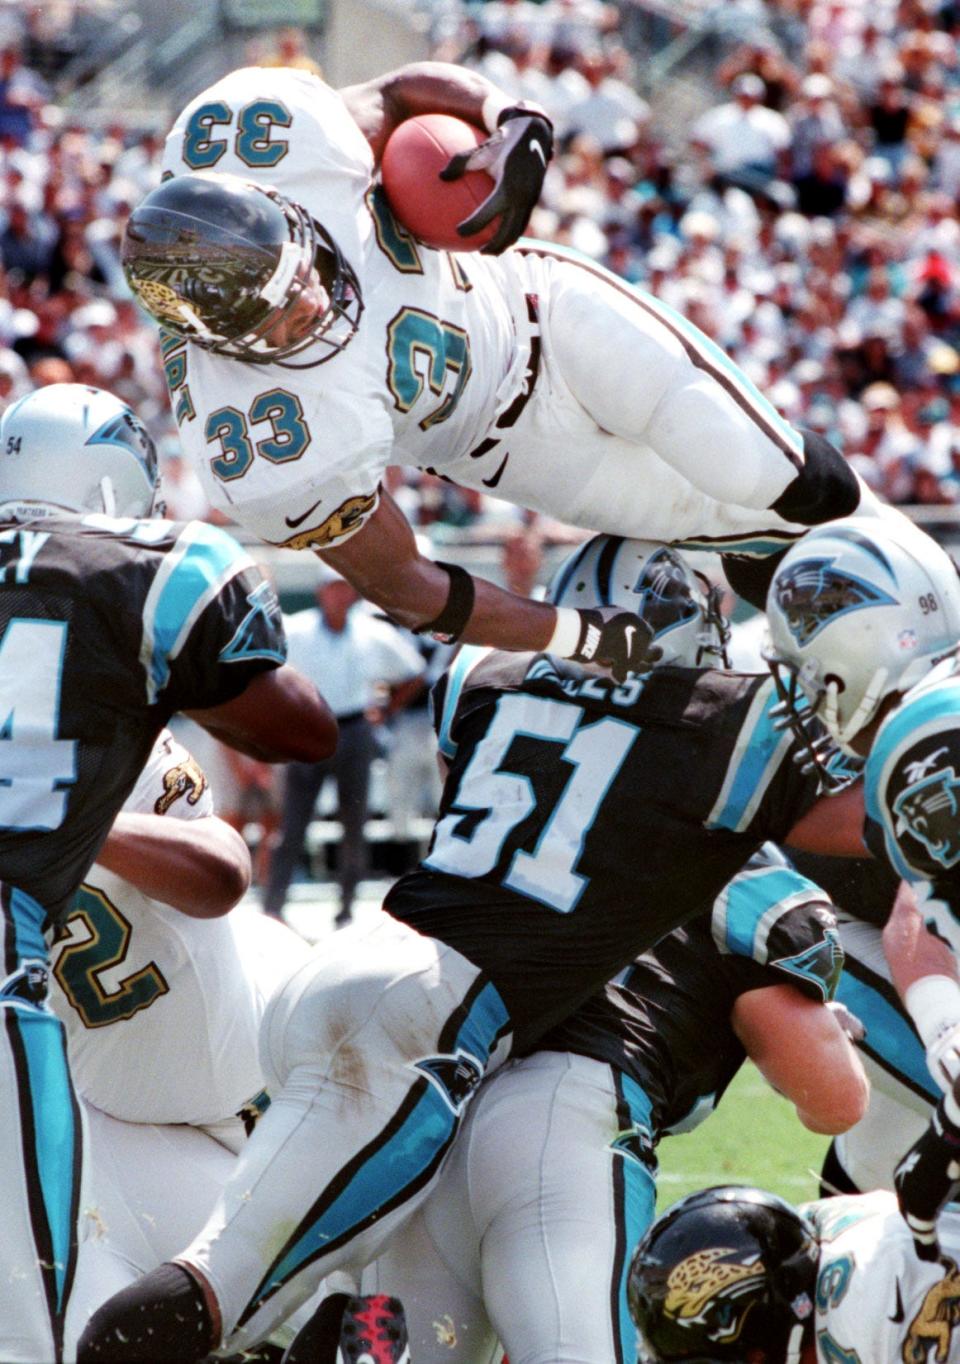 The Jaguars and Panthers, who came into the NFL together, face off in Jacksonville's final regular season home game.